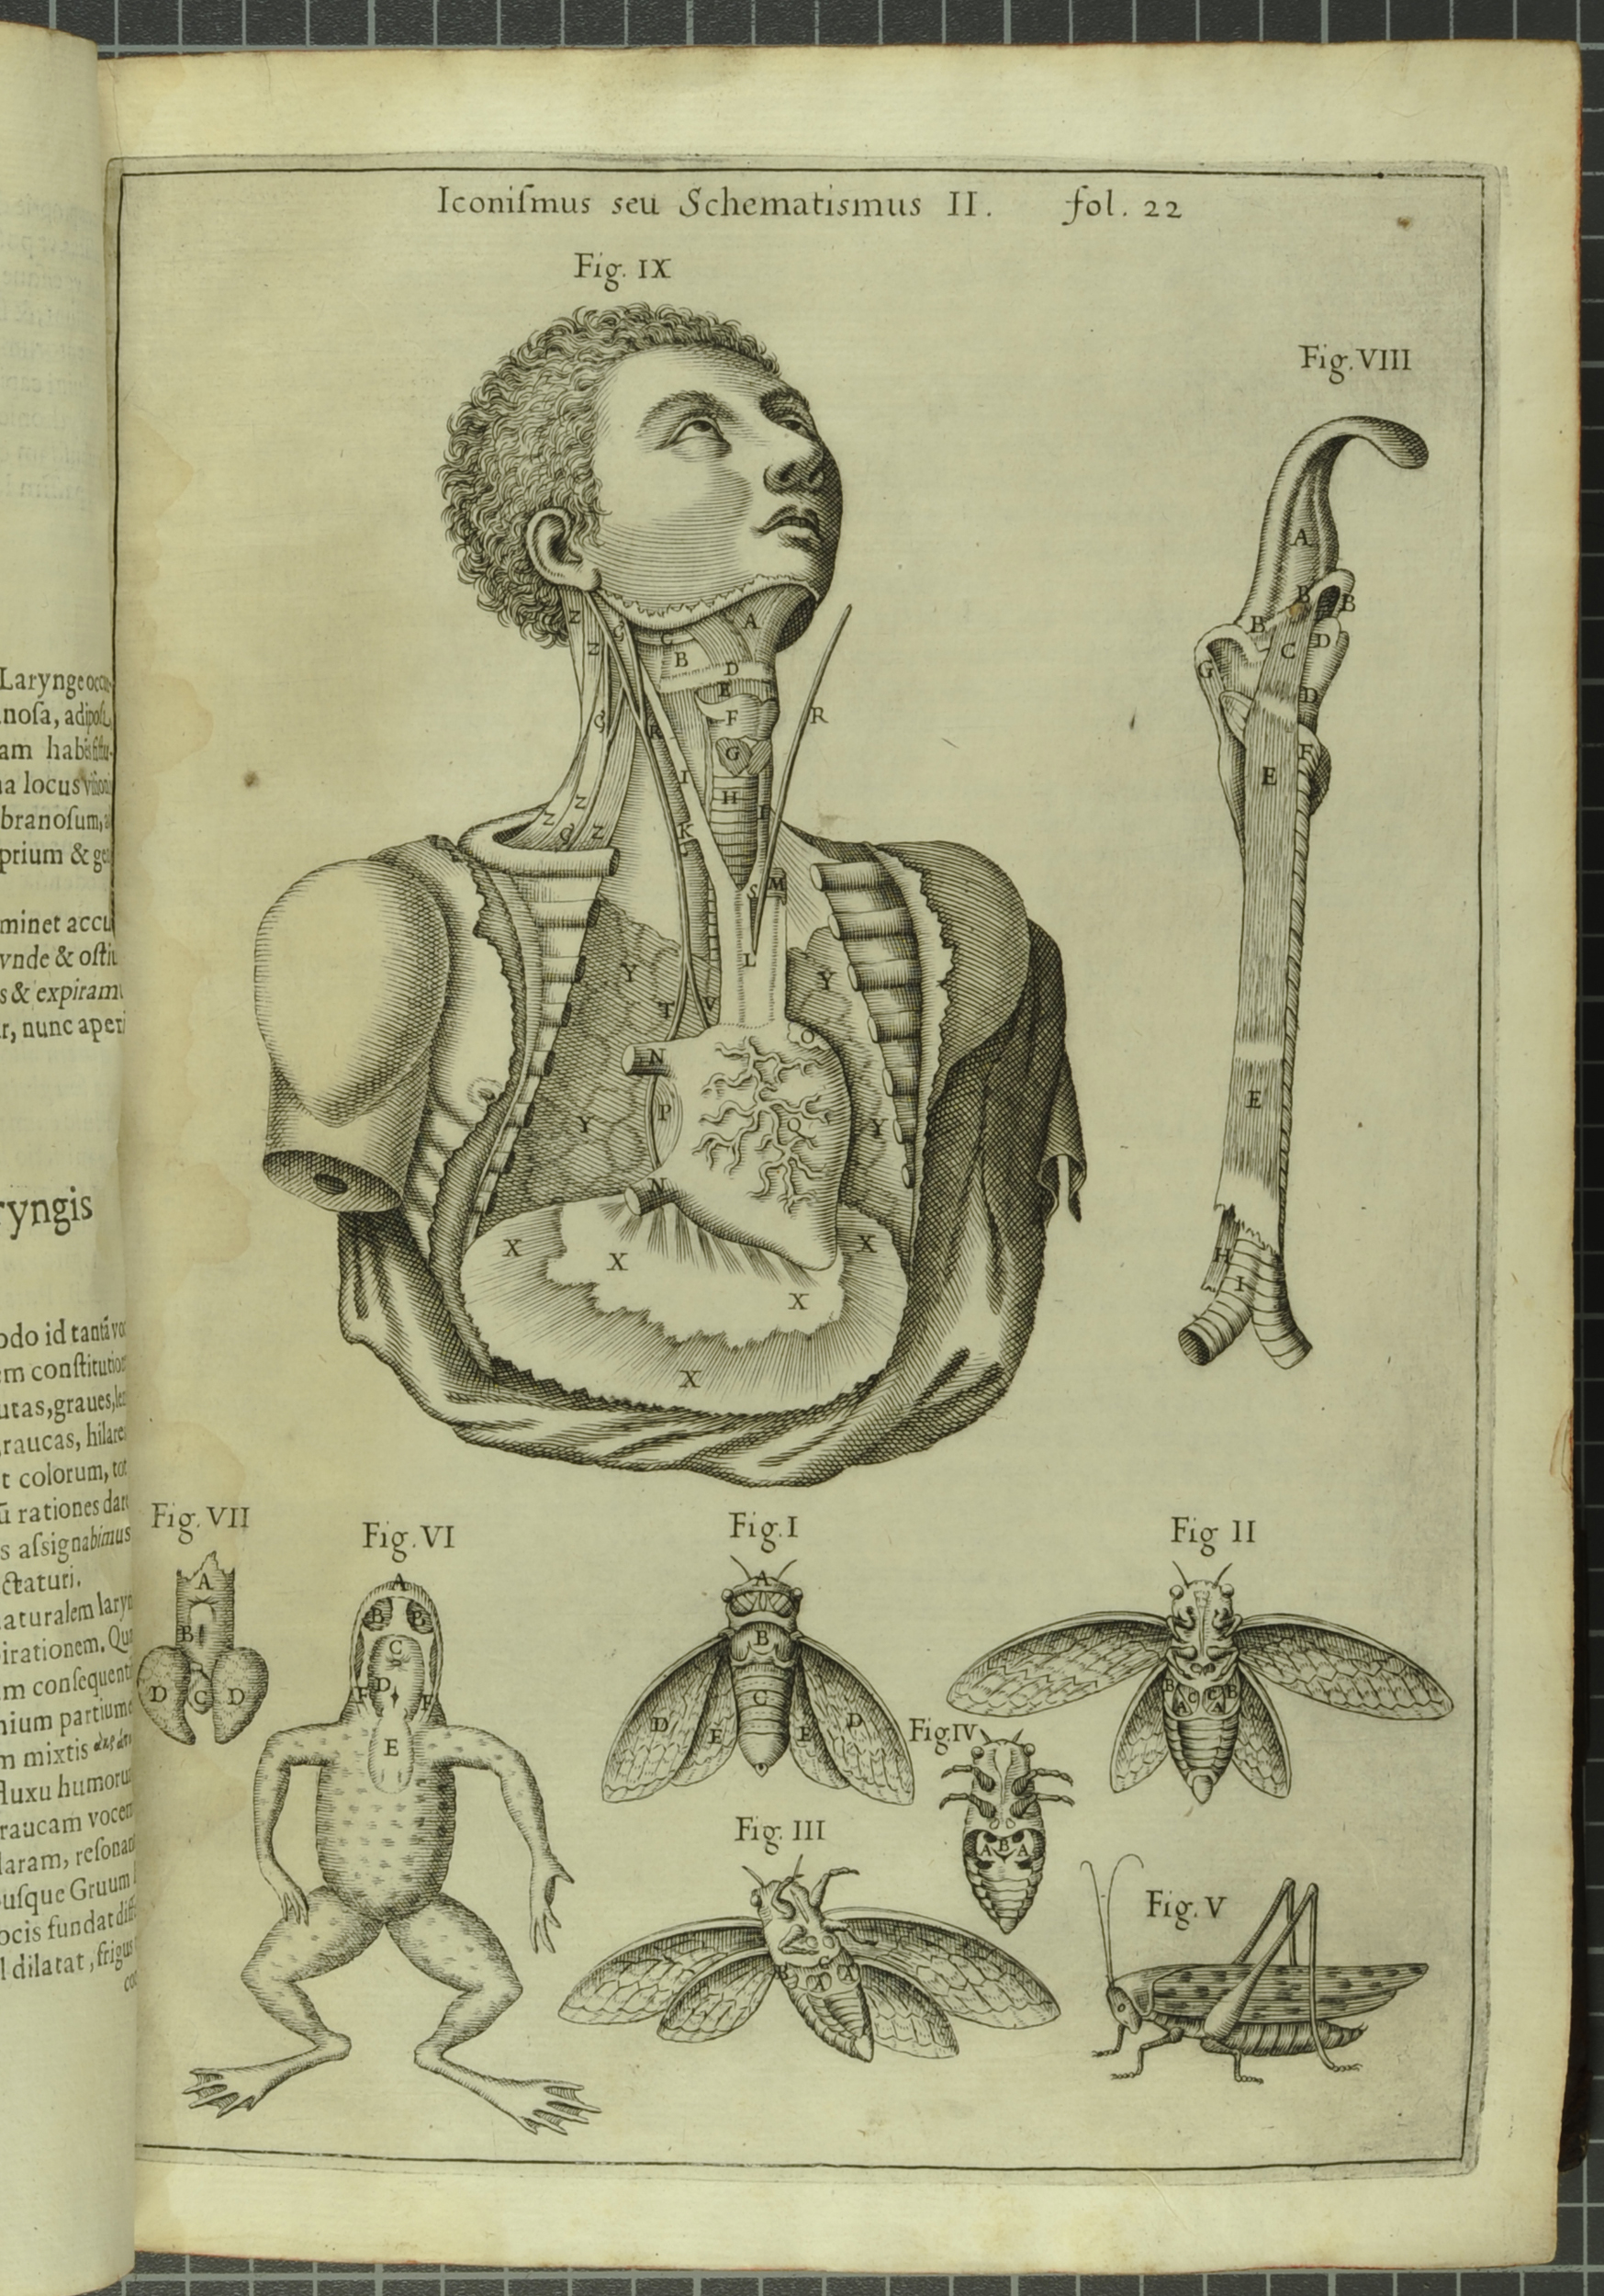 Illustration from Kircher's Musurgia Universalis depicting various voice or noise producing organs in men, frogs, bees, grasshoppers and other insects (St Andrews copy at r17f ML3805.K5M8)